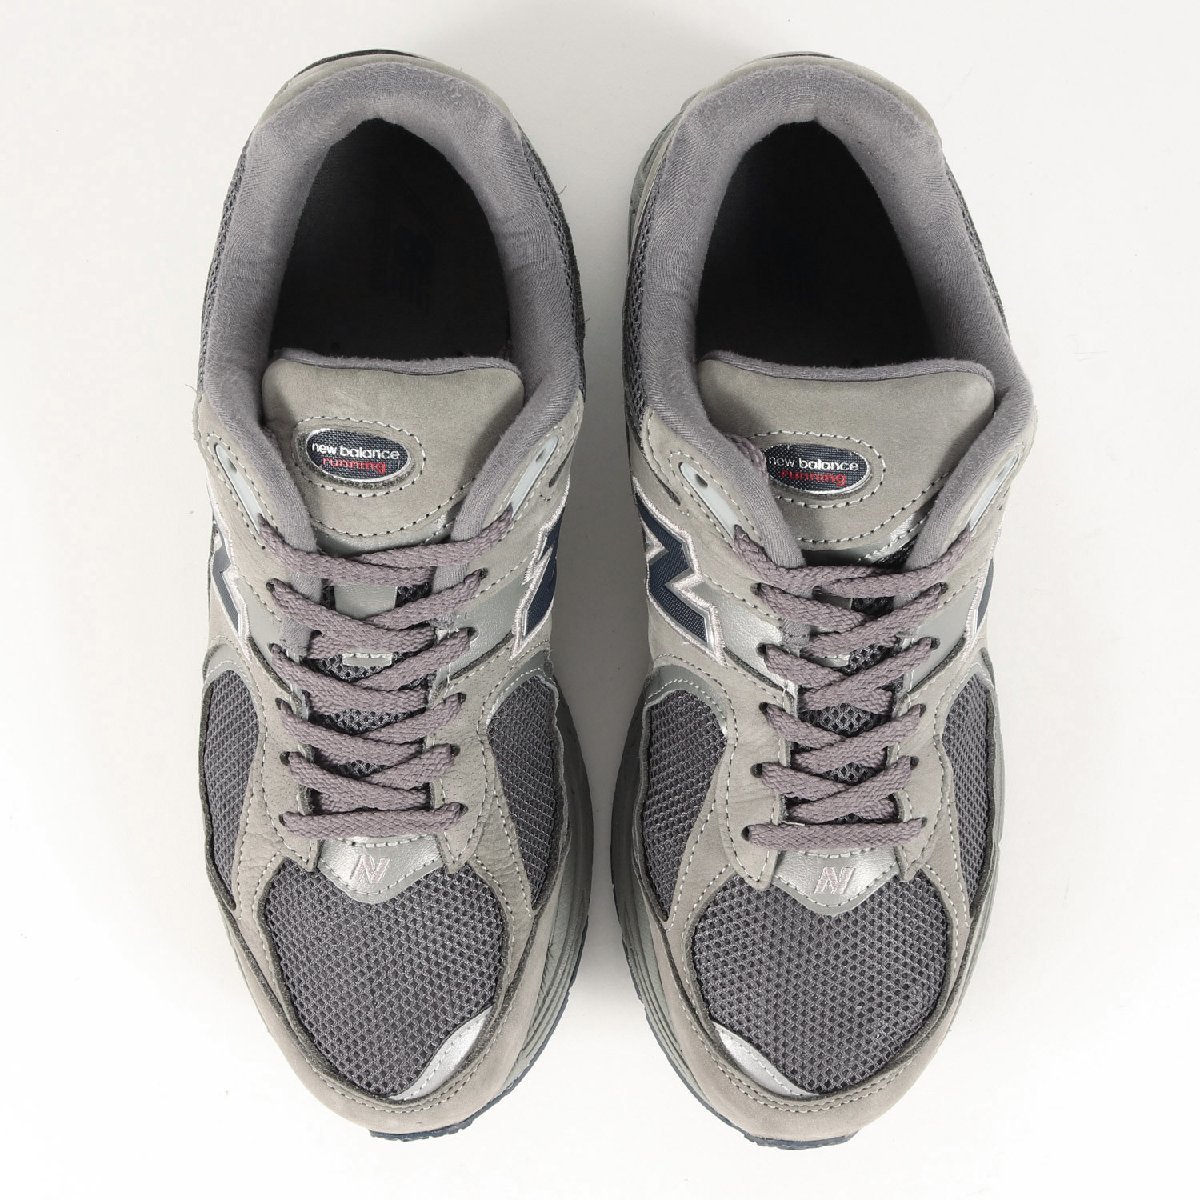 NEW BALANCE New balance size :28.0cm ML2002 RA 2022 year made dark gray US10 D low cut sneakers shoes shoes brand 